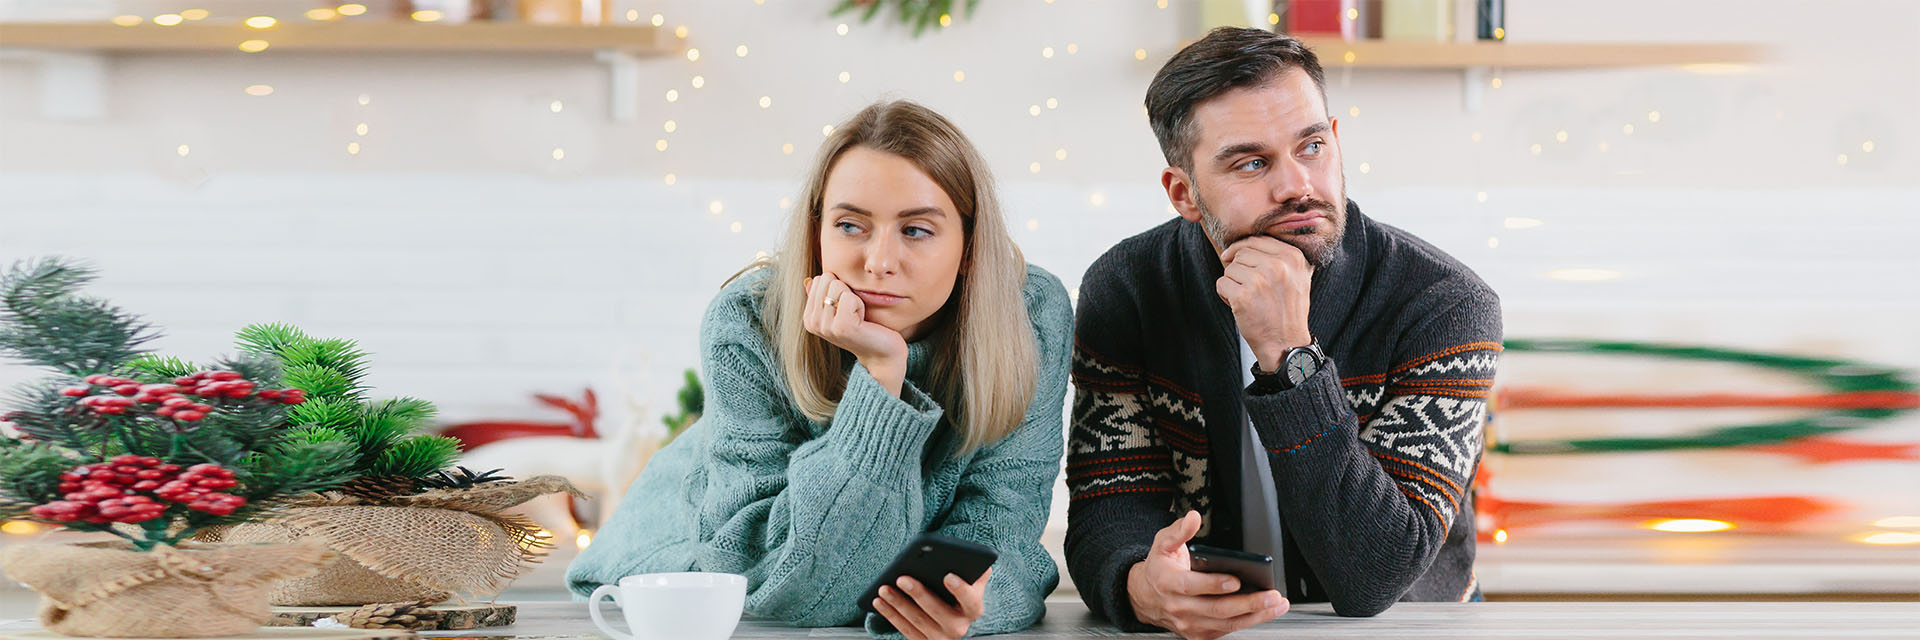 Young couple looking sad with holiday decorations 